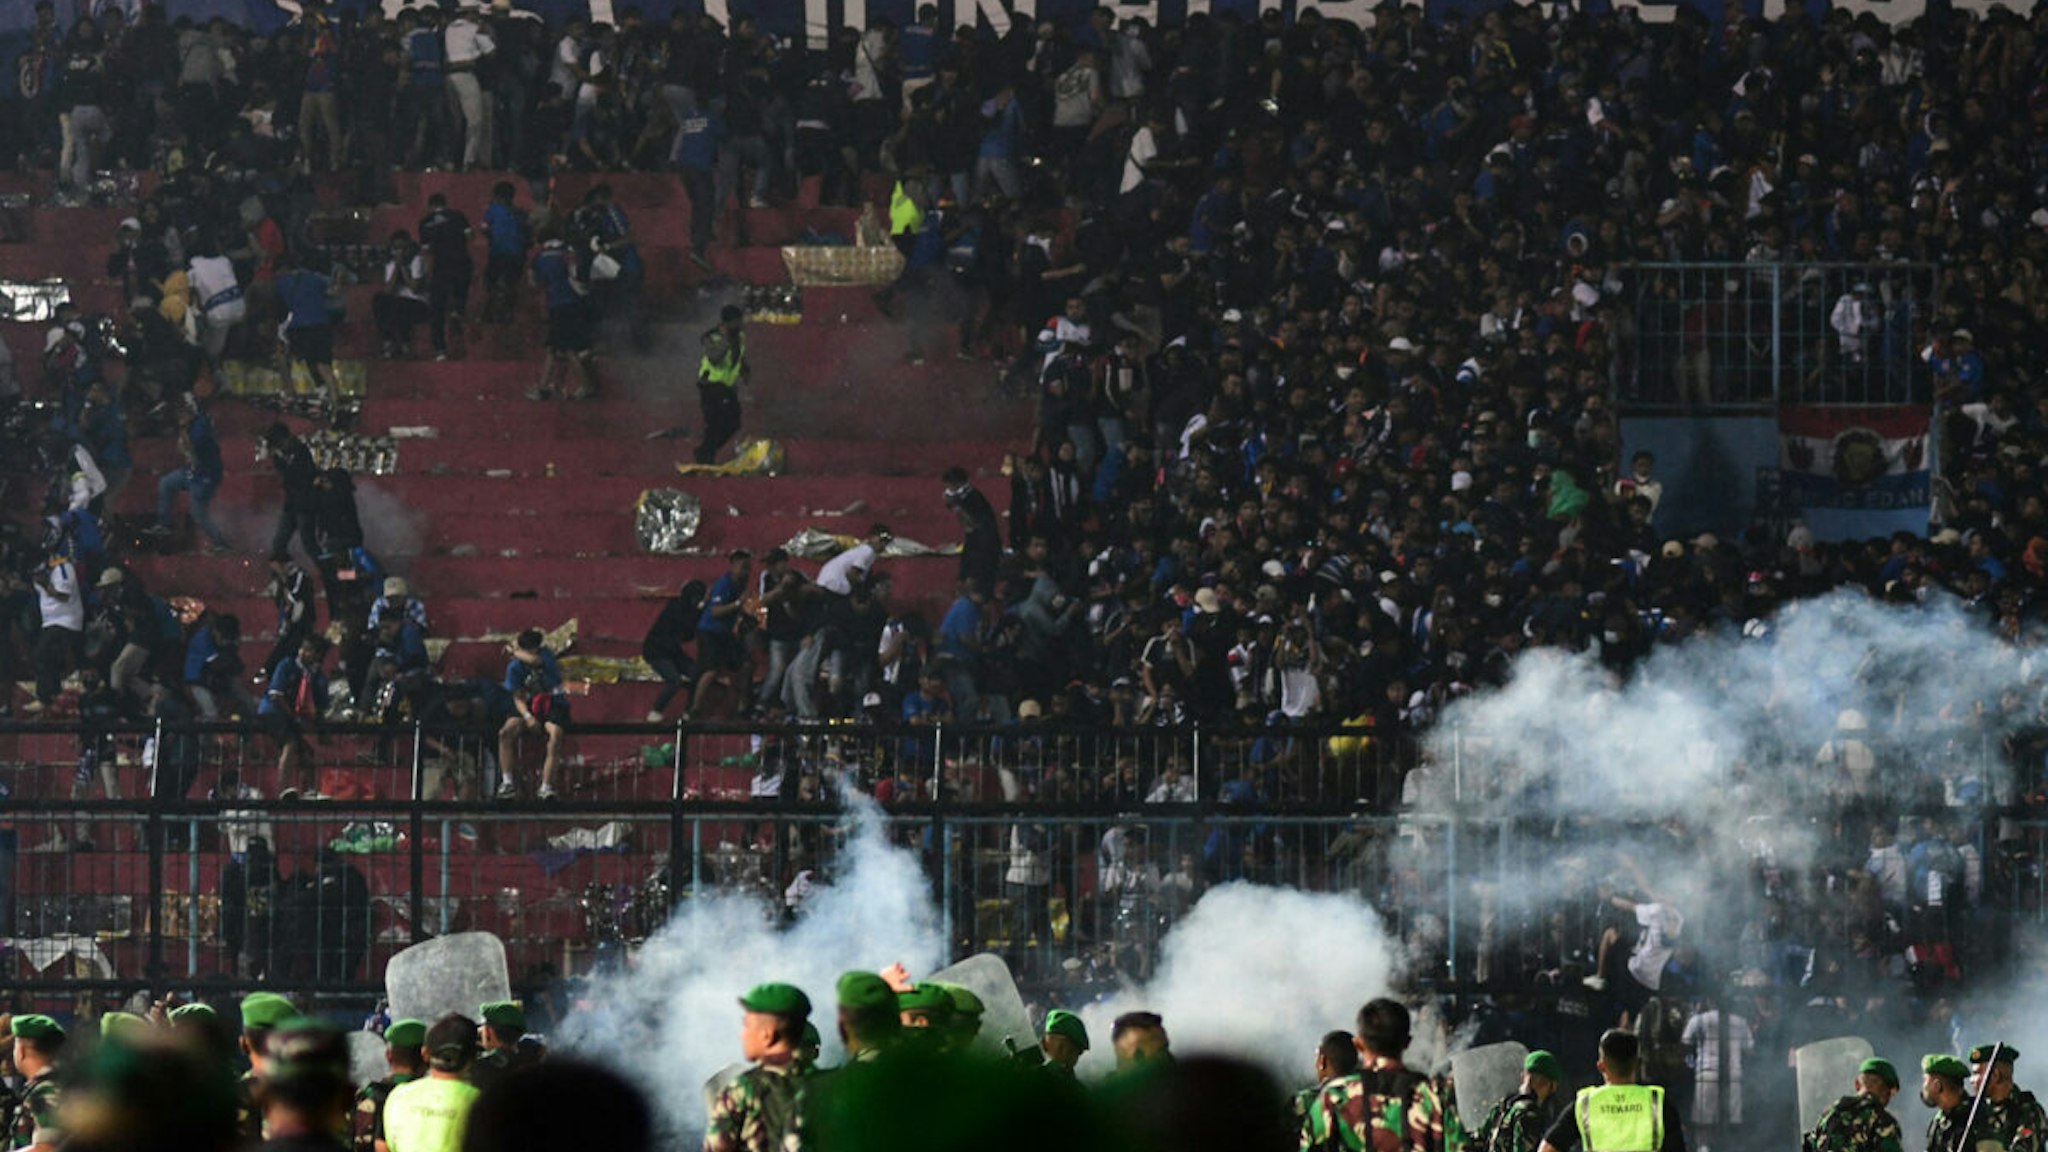 This picture taken on October 1, 2022 shows security personnel (lower) on the pitch after a football match between Arema FC and Persebaya Surabaya at Kanjuruhan stadium in Malang, East Java